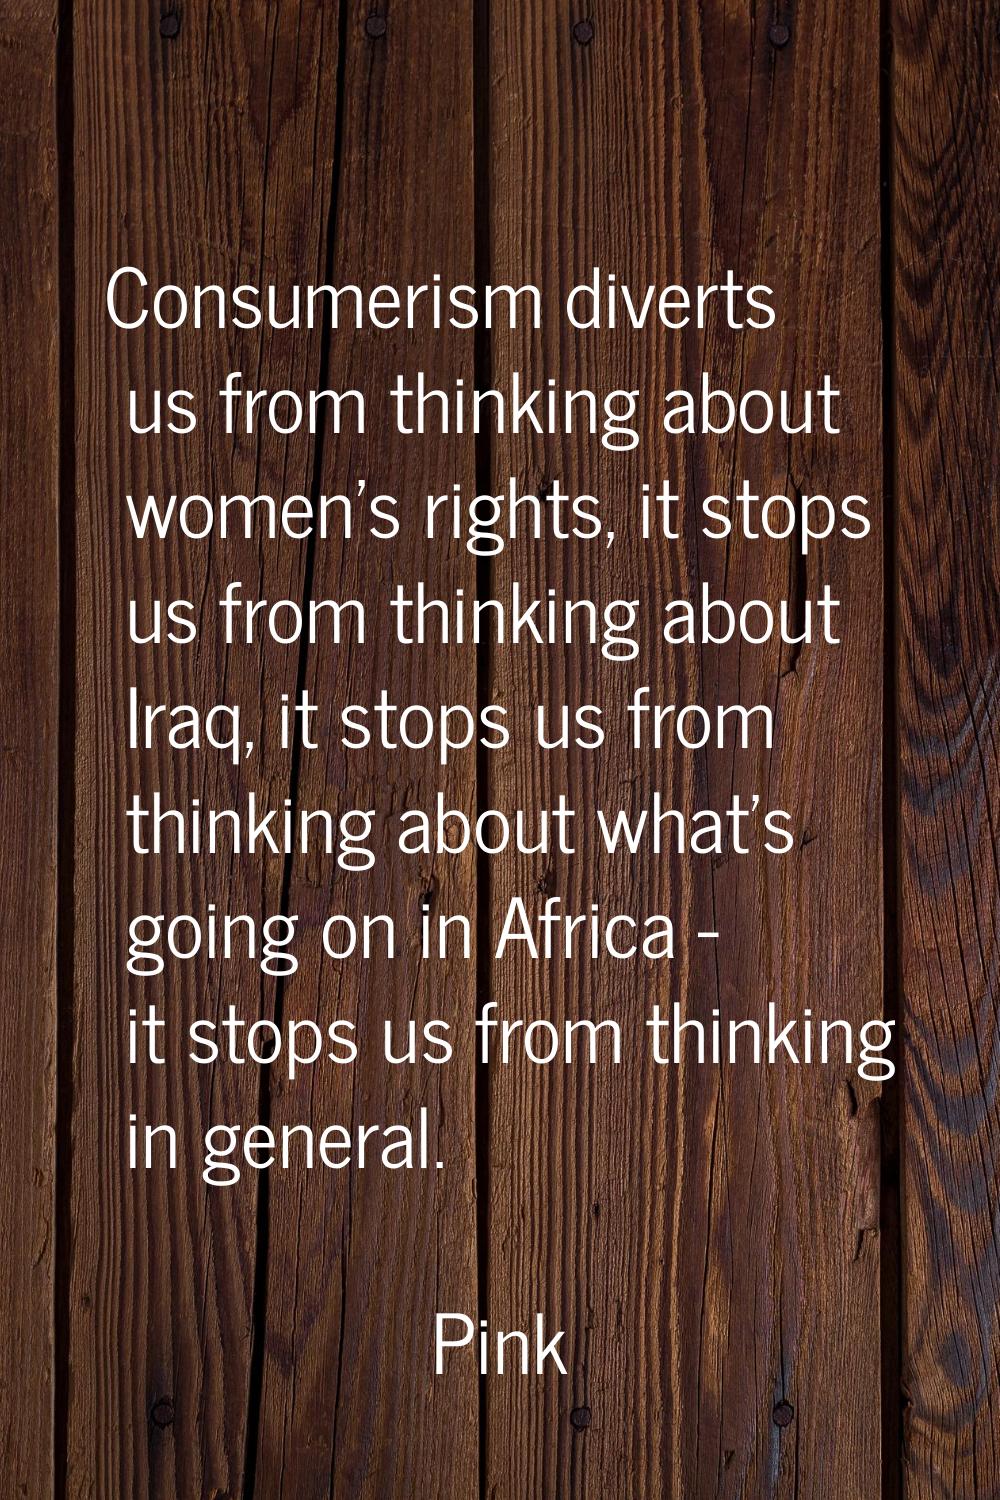 Consumerism diverts us from thinking about women's rights, it stops us from thinking about Iraq, it